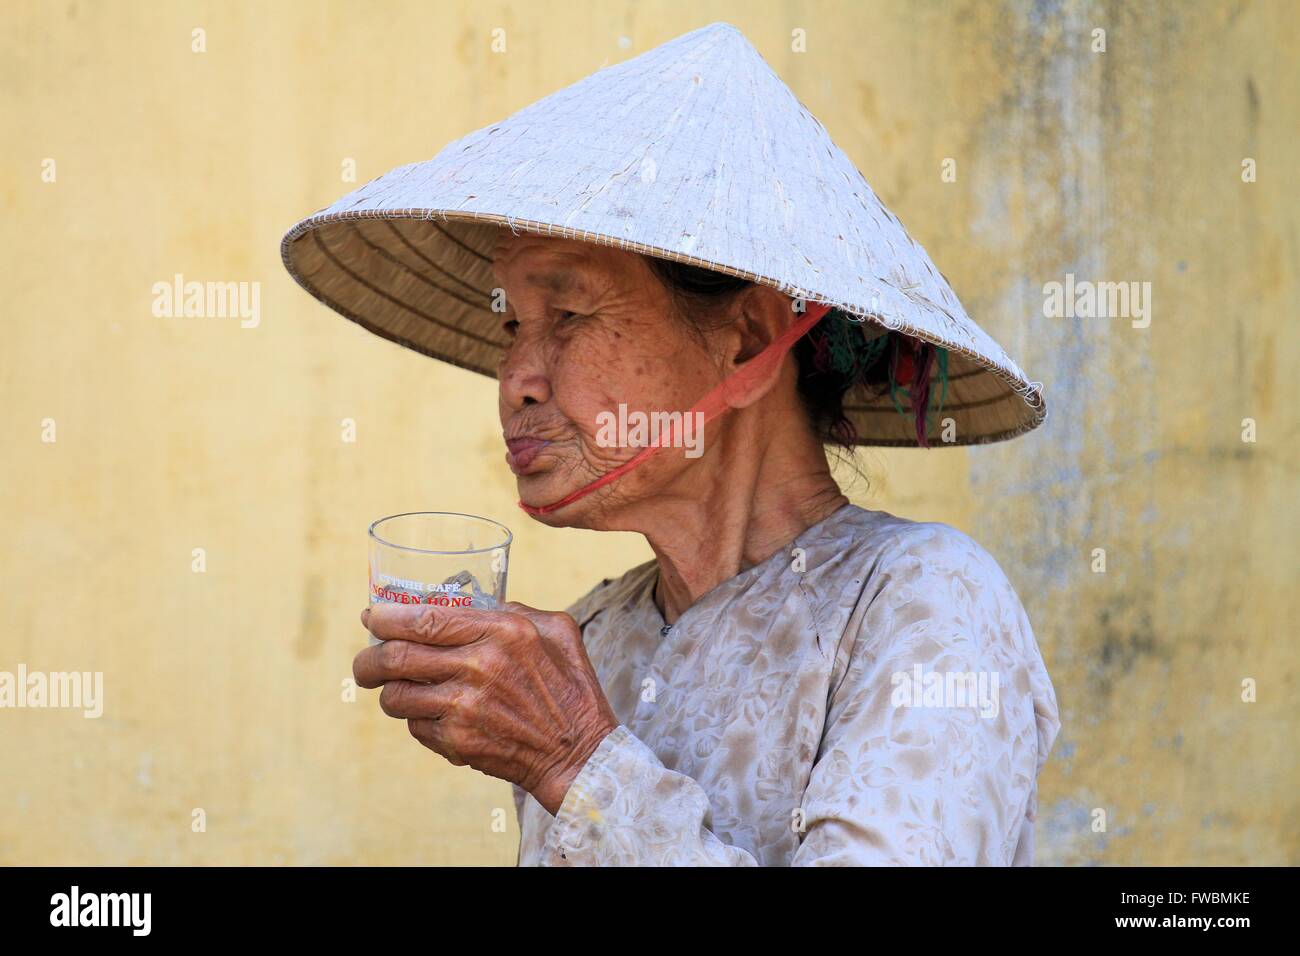 Portrait of wrinkled lady with conical hat having a drink, Hoi An, Vietnam, Asia Stock Photo